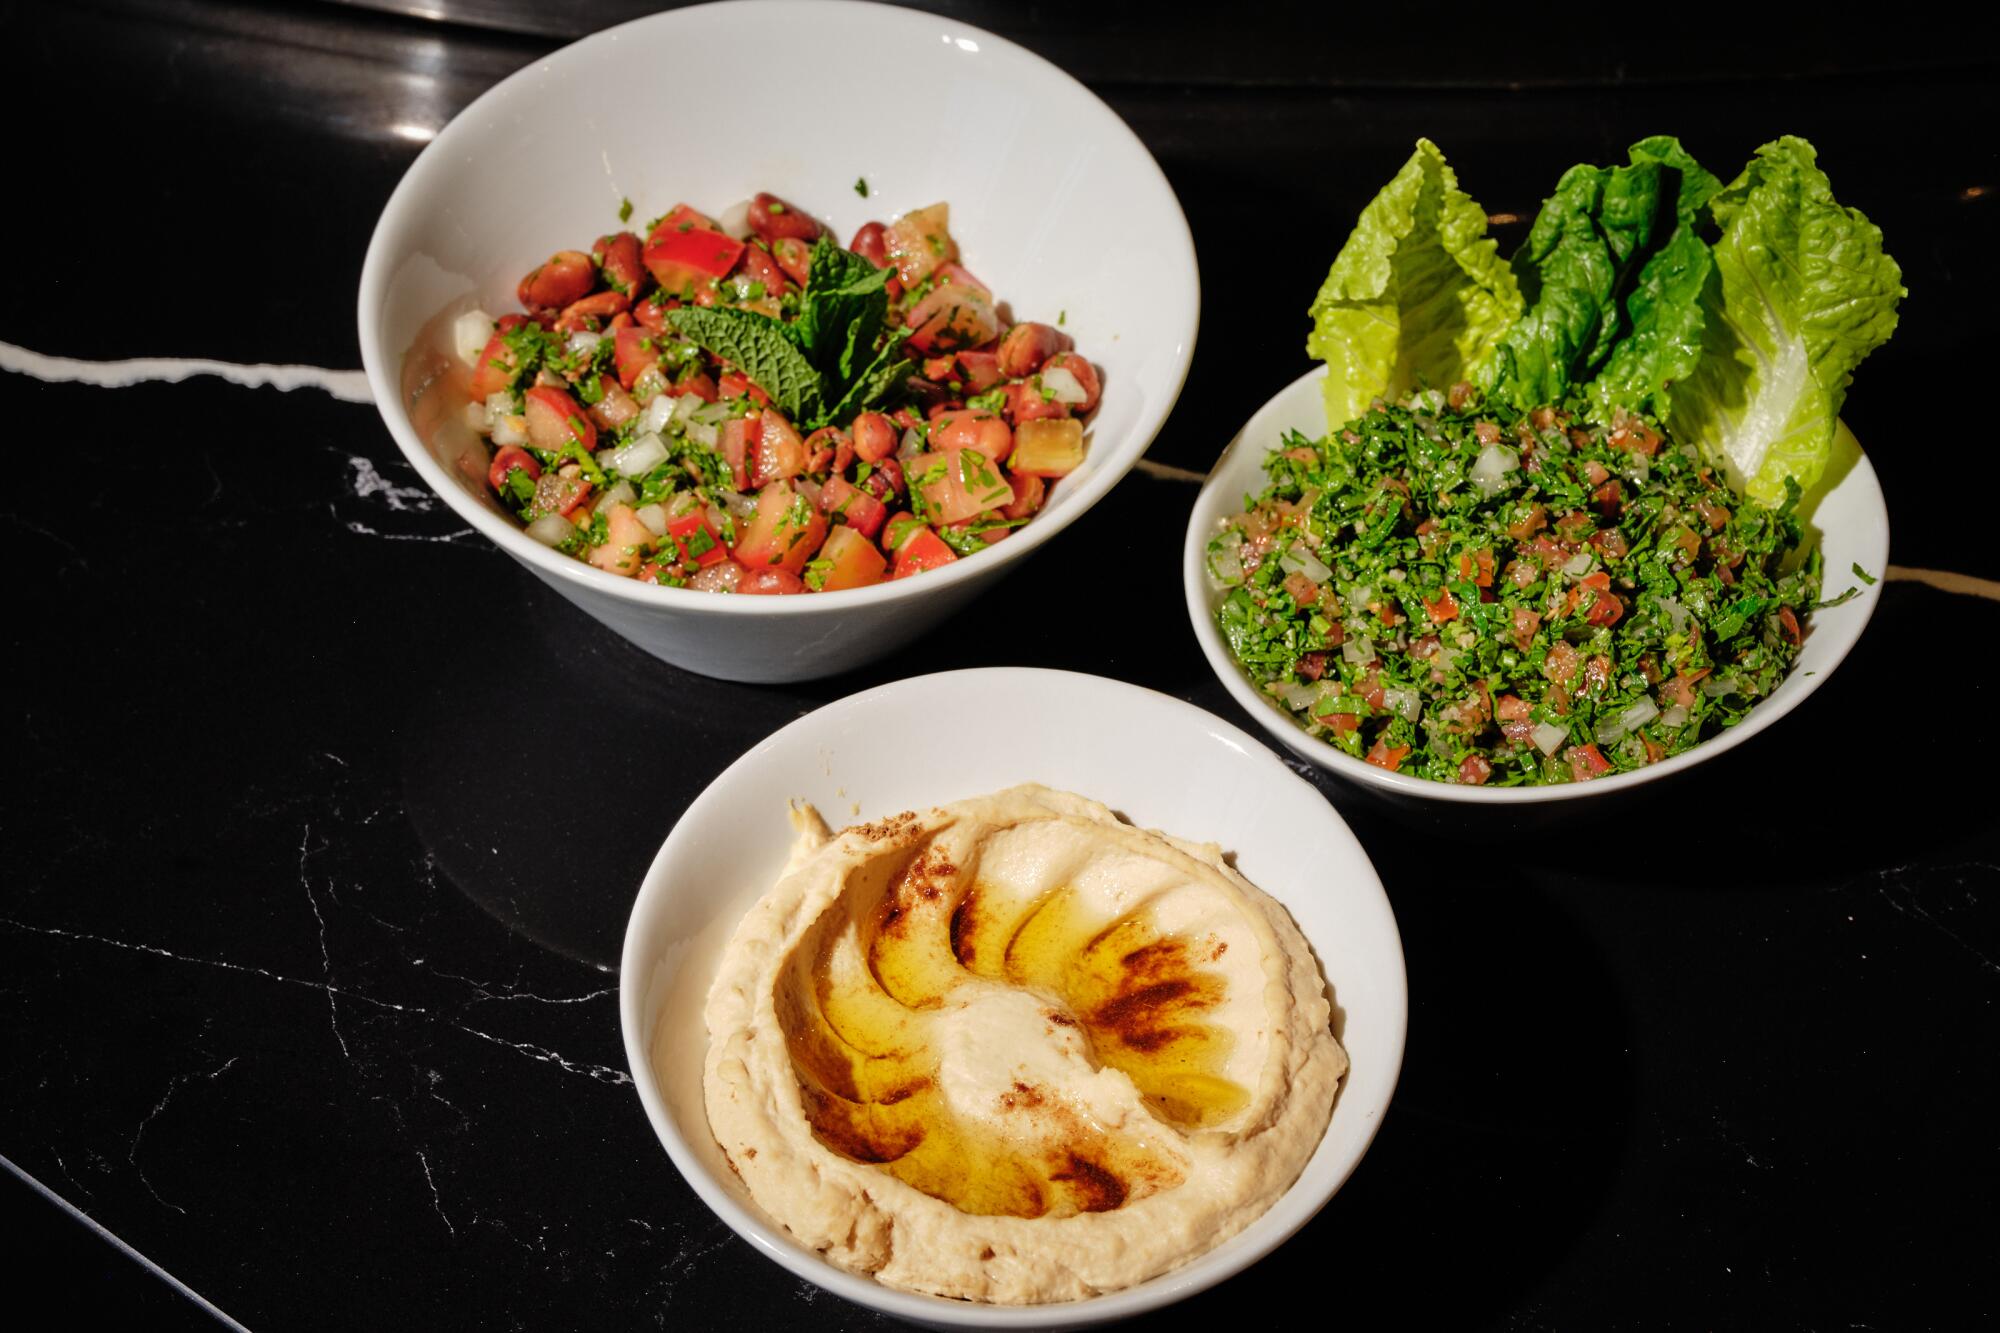 Sides of ful medames (top left), tabouleh (right), and hummus (bottom) Shawarma.